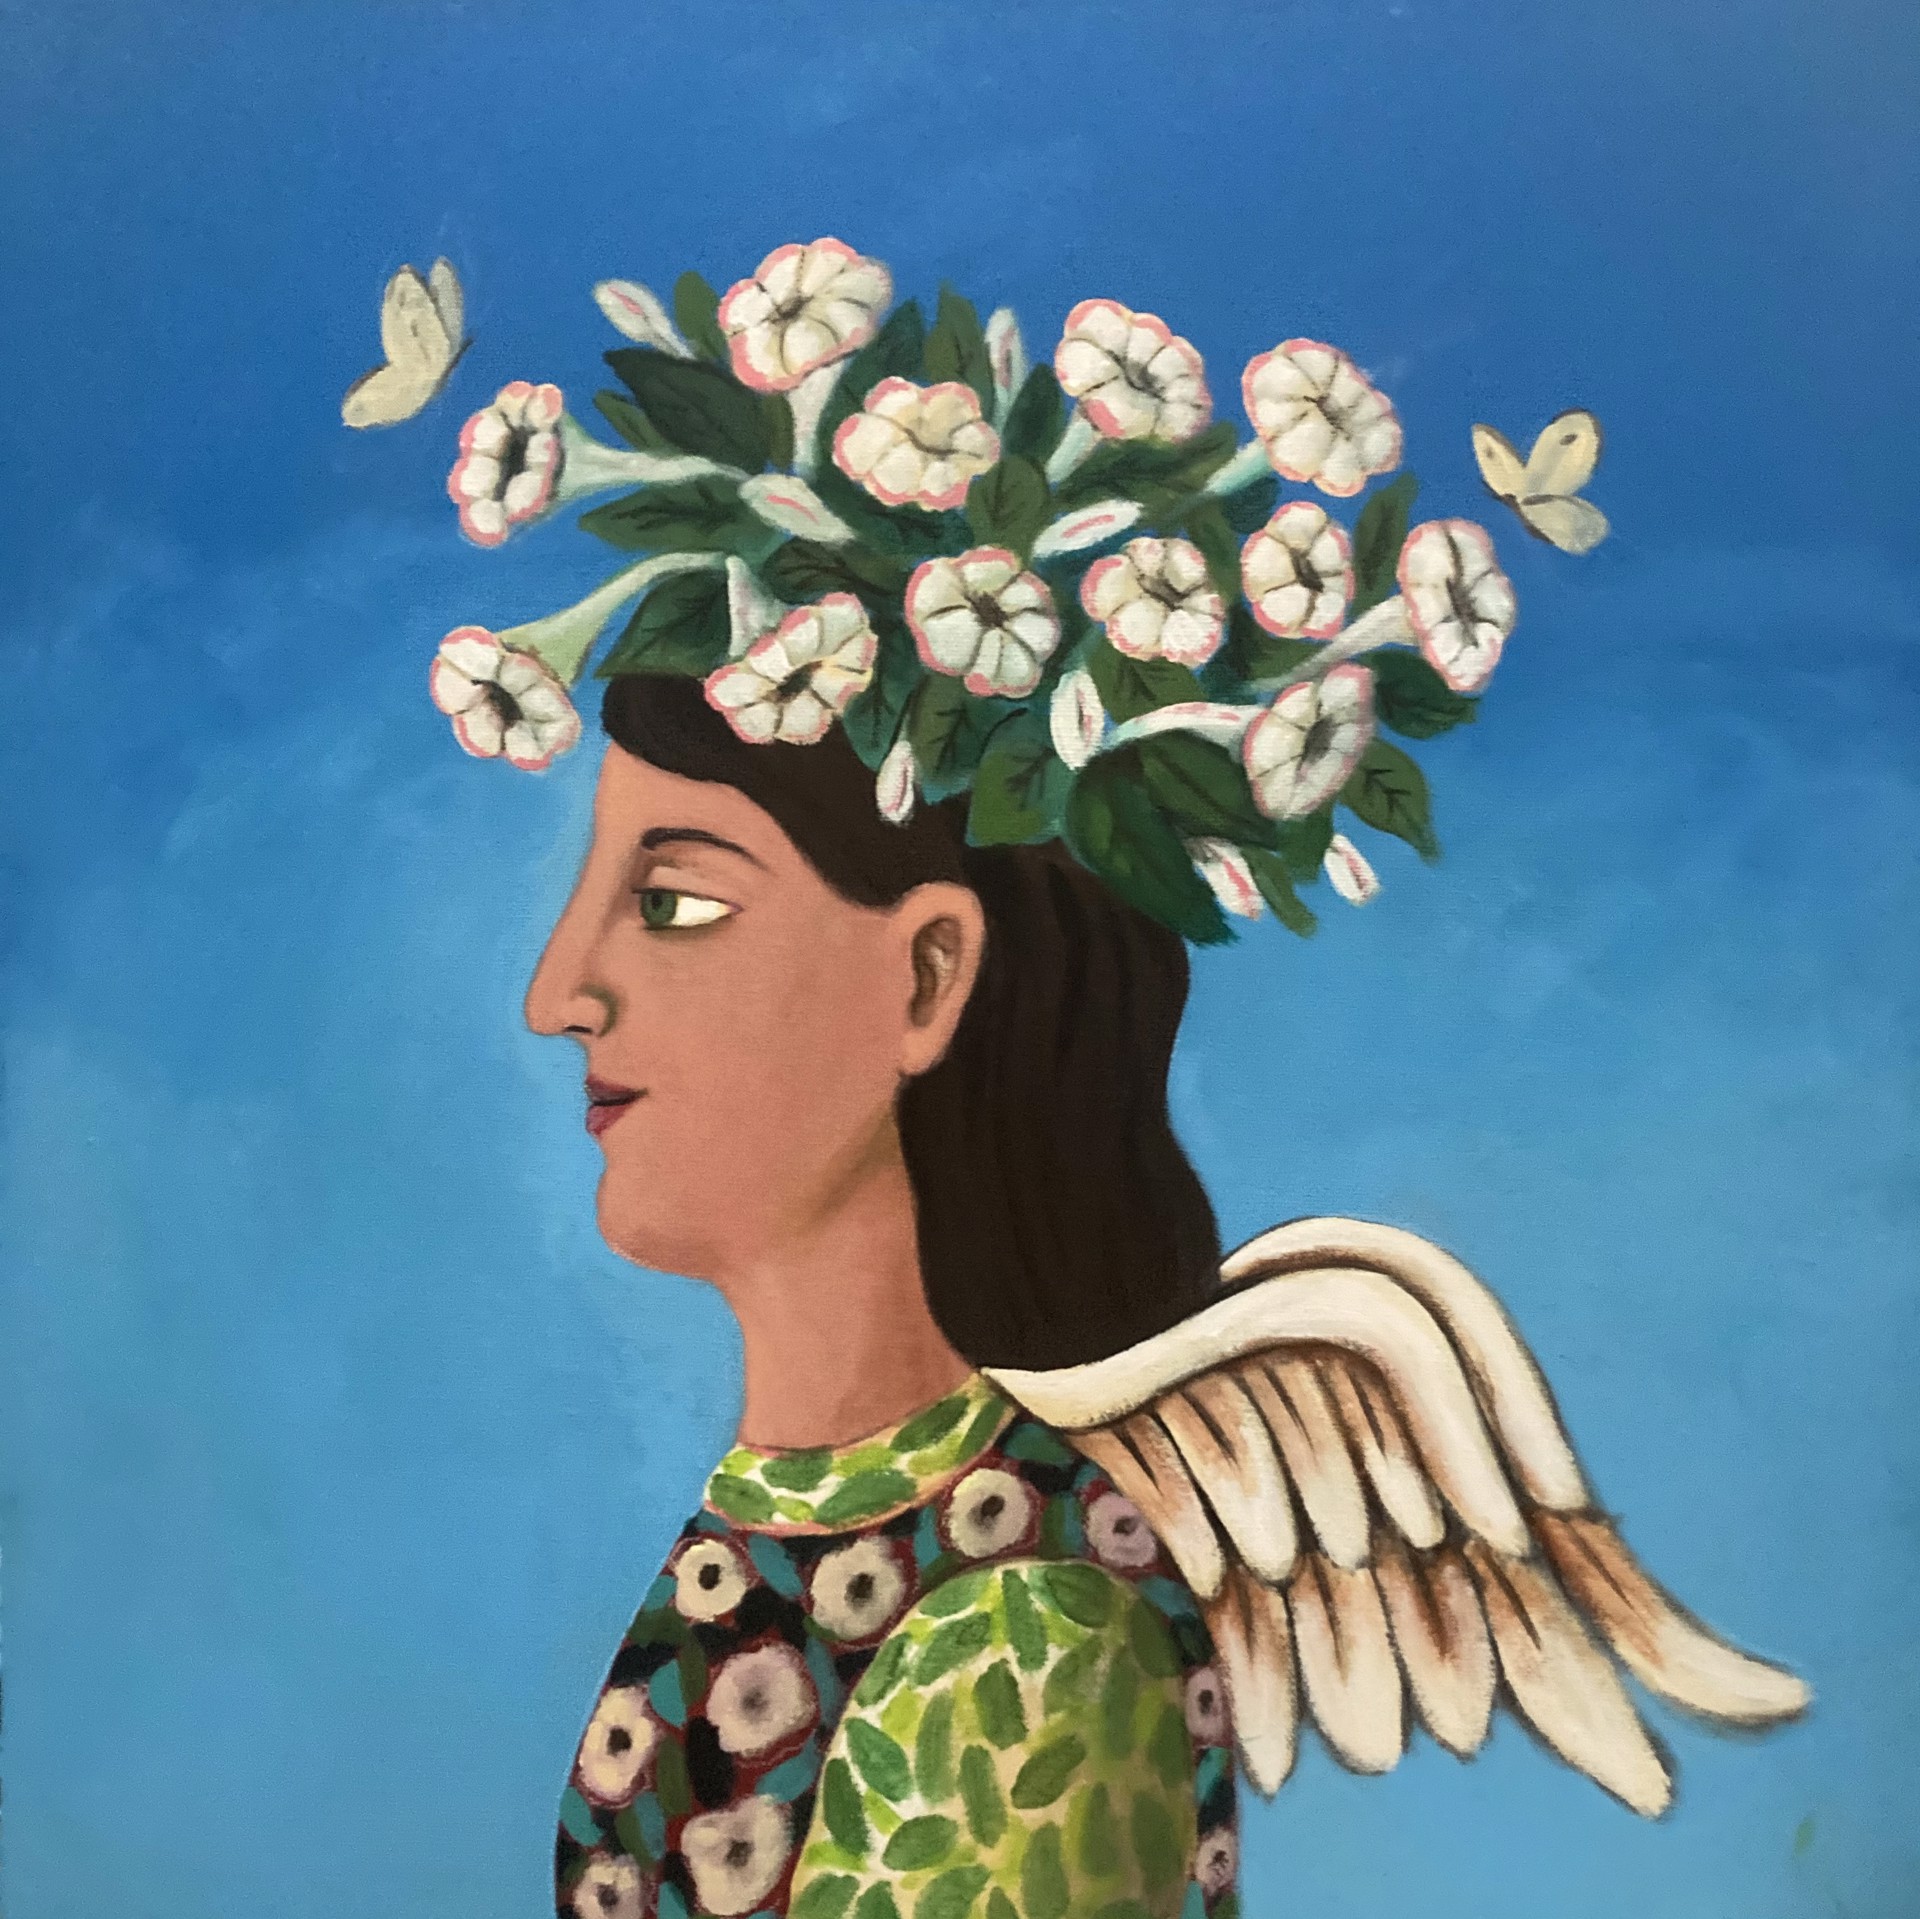 Angel of Spring by Esau Andrade